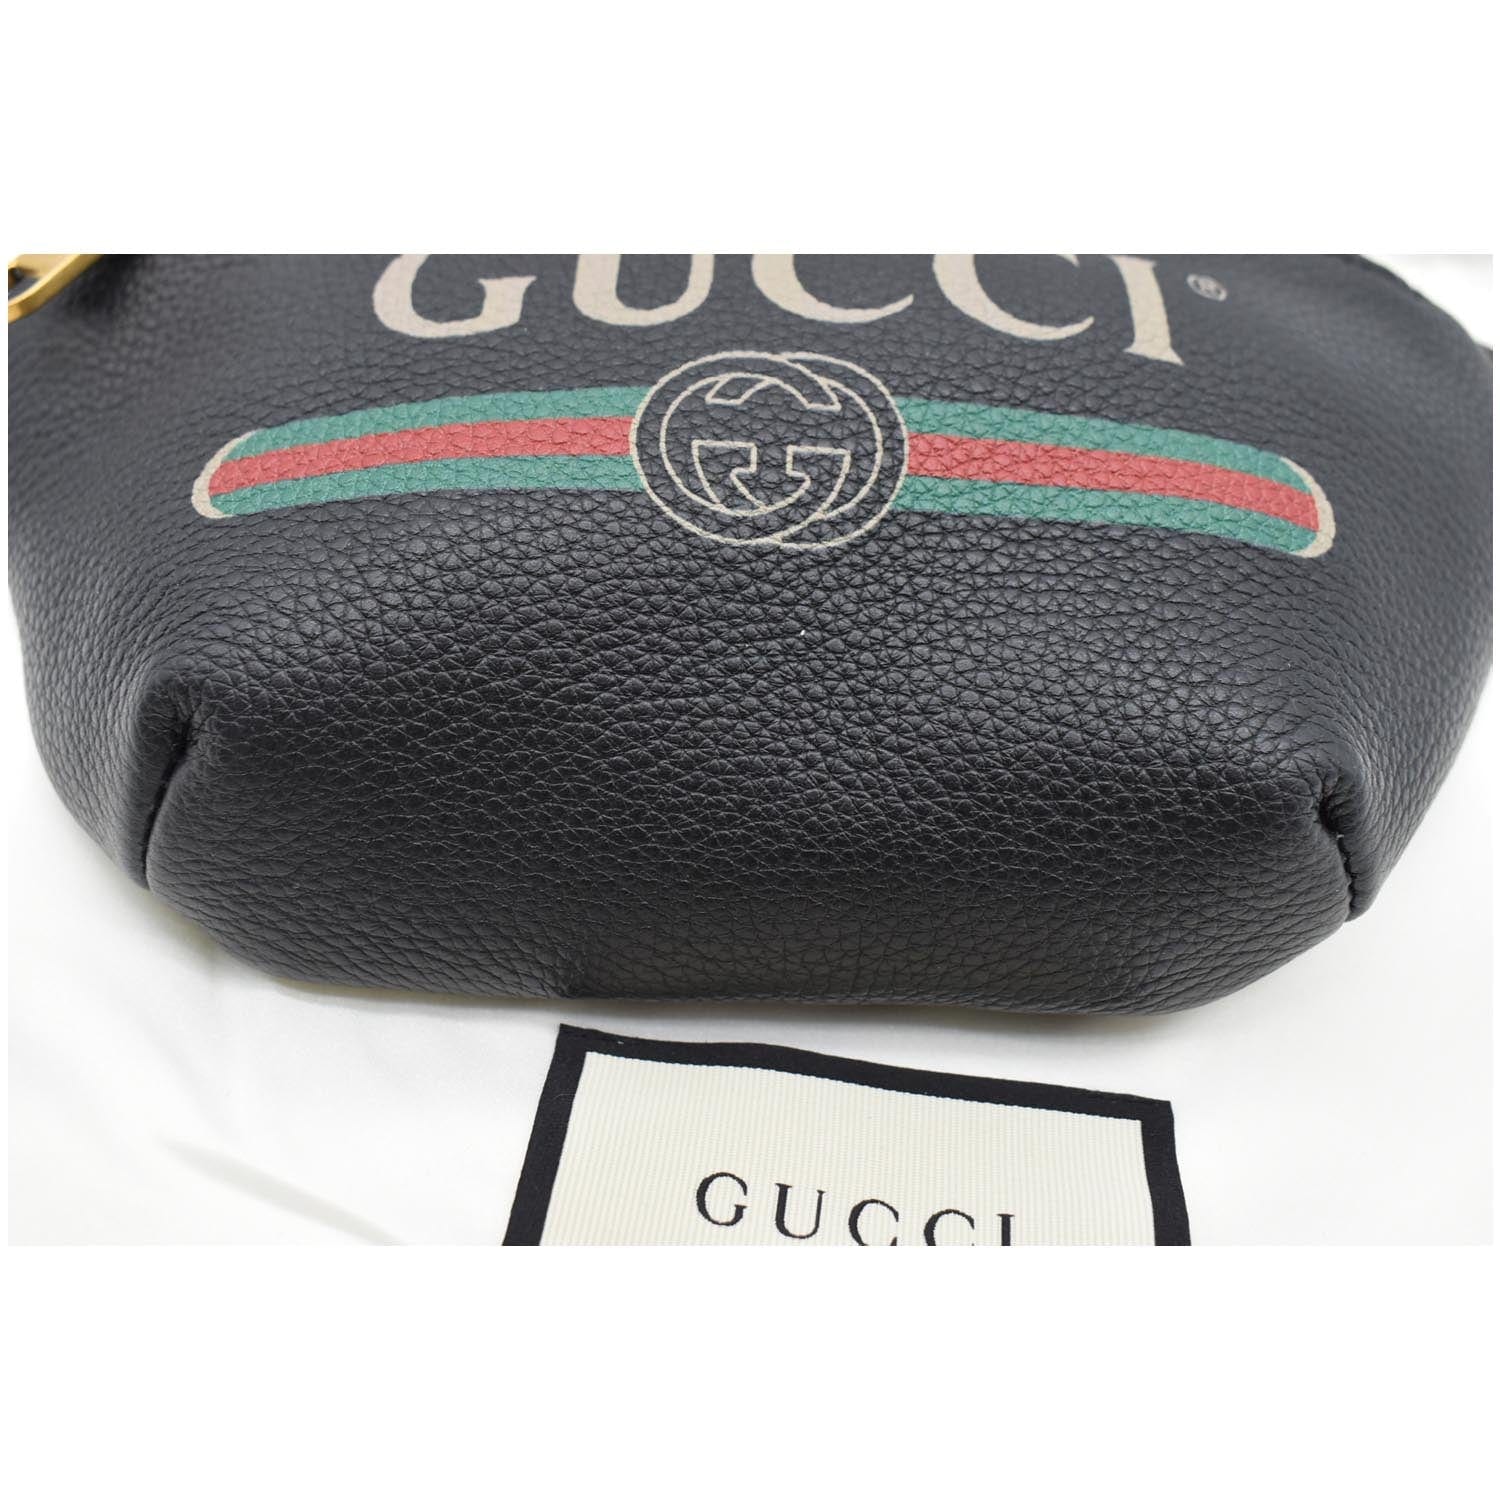 Gucci, Bags, Authentic Used Gucci Coin Purse